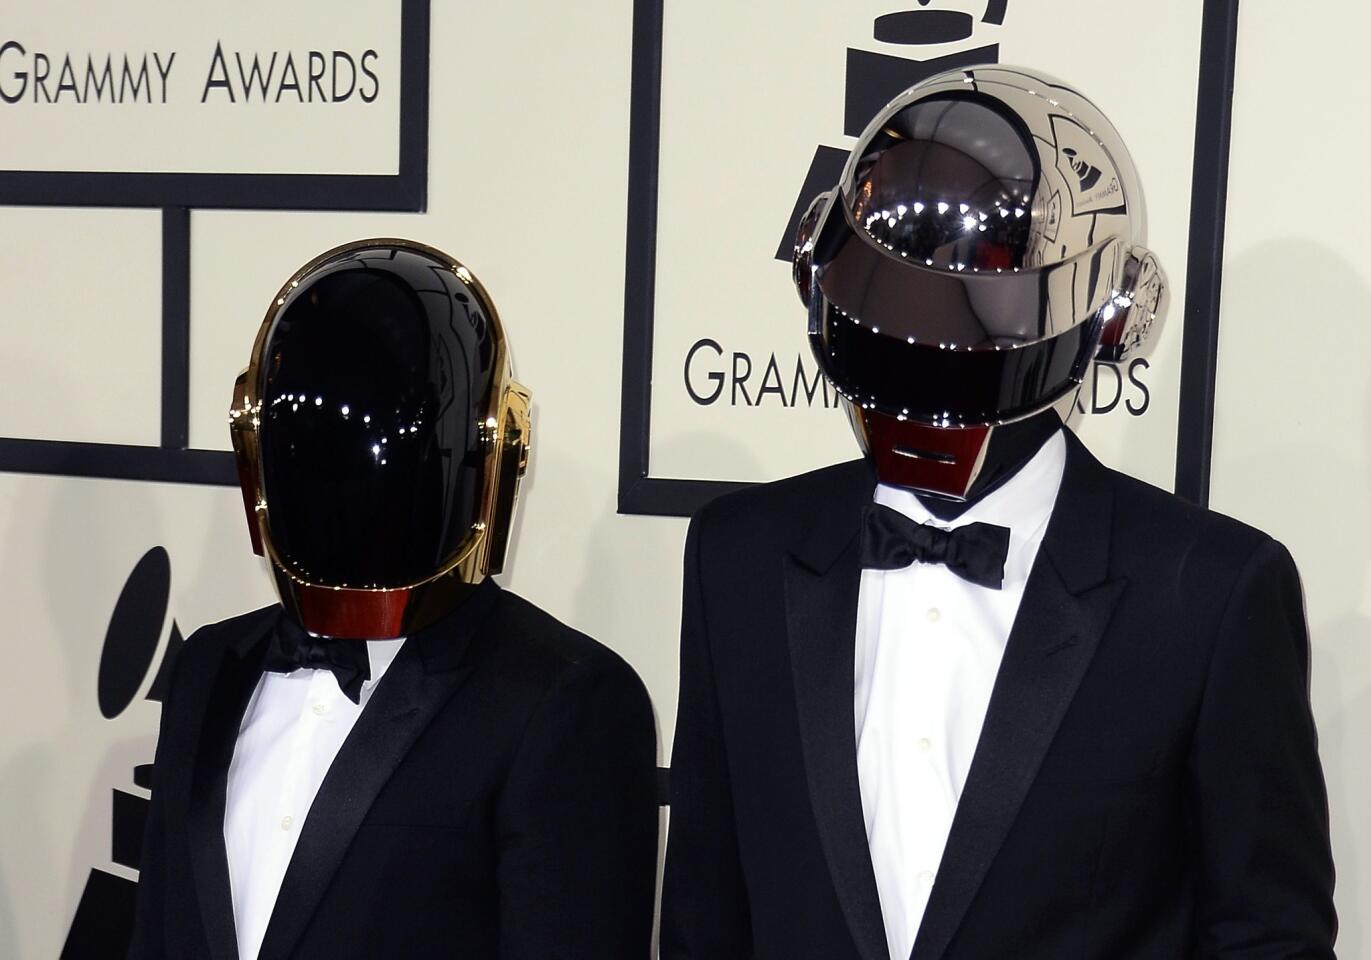 Daft Punk picked up the most coveted award at the Grammys this year for "Random Access Memories," taking home a total of five trophies from the ceremony. The stubbornly silent duo left Pharrell Williams to do all their talking, but who could pay attention with the producer's Twitter-stimulating hat to ogle at? Leave it to collaborator and fellow winner Paul Williams to save the whole night by putting the right words in the robots' mouths.